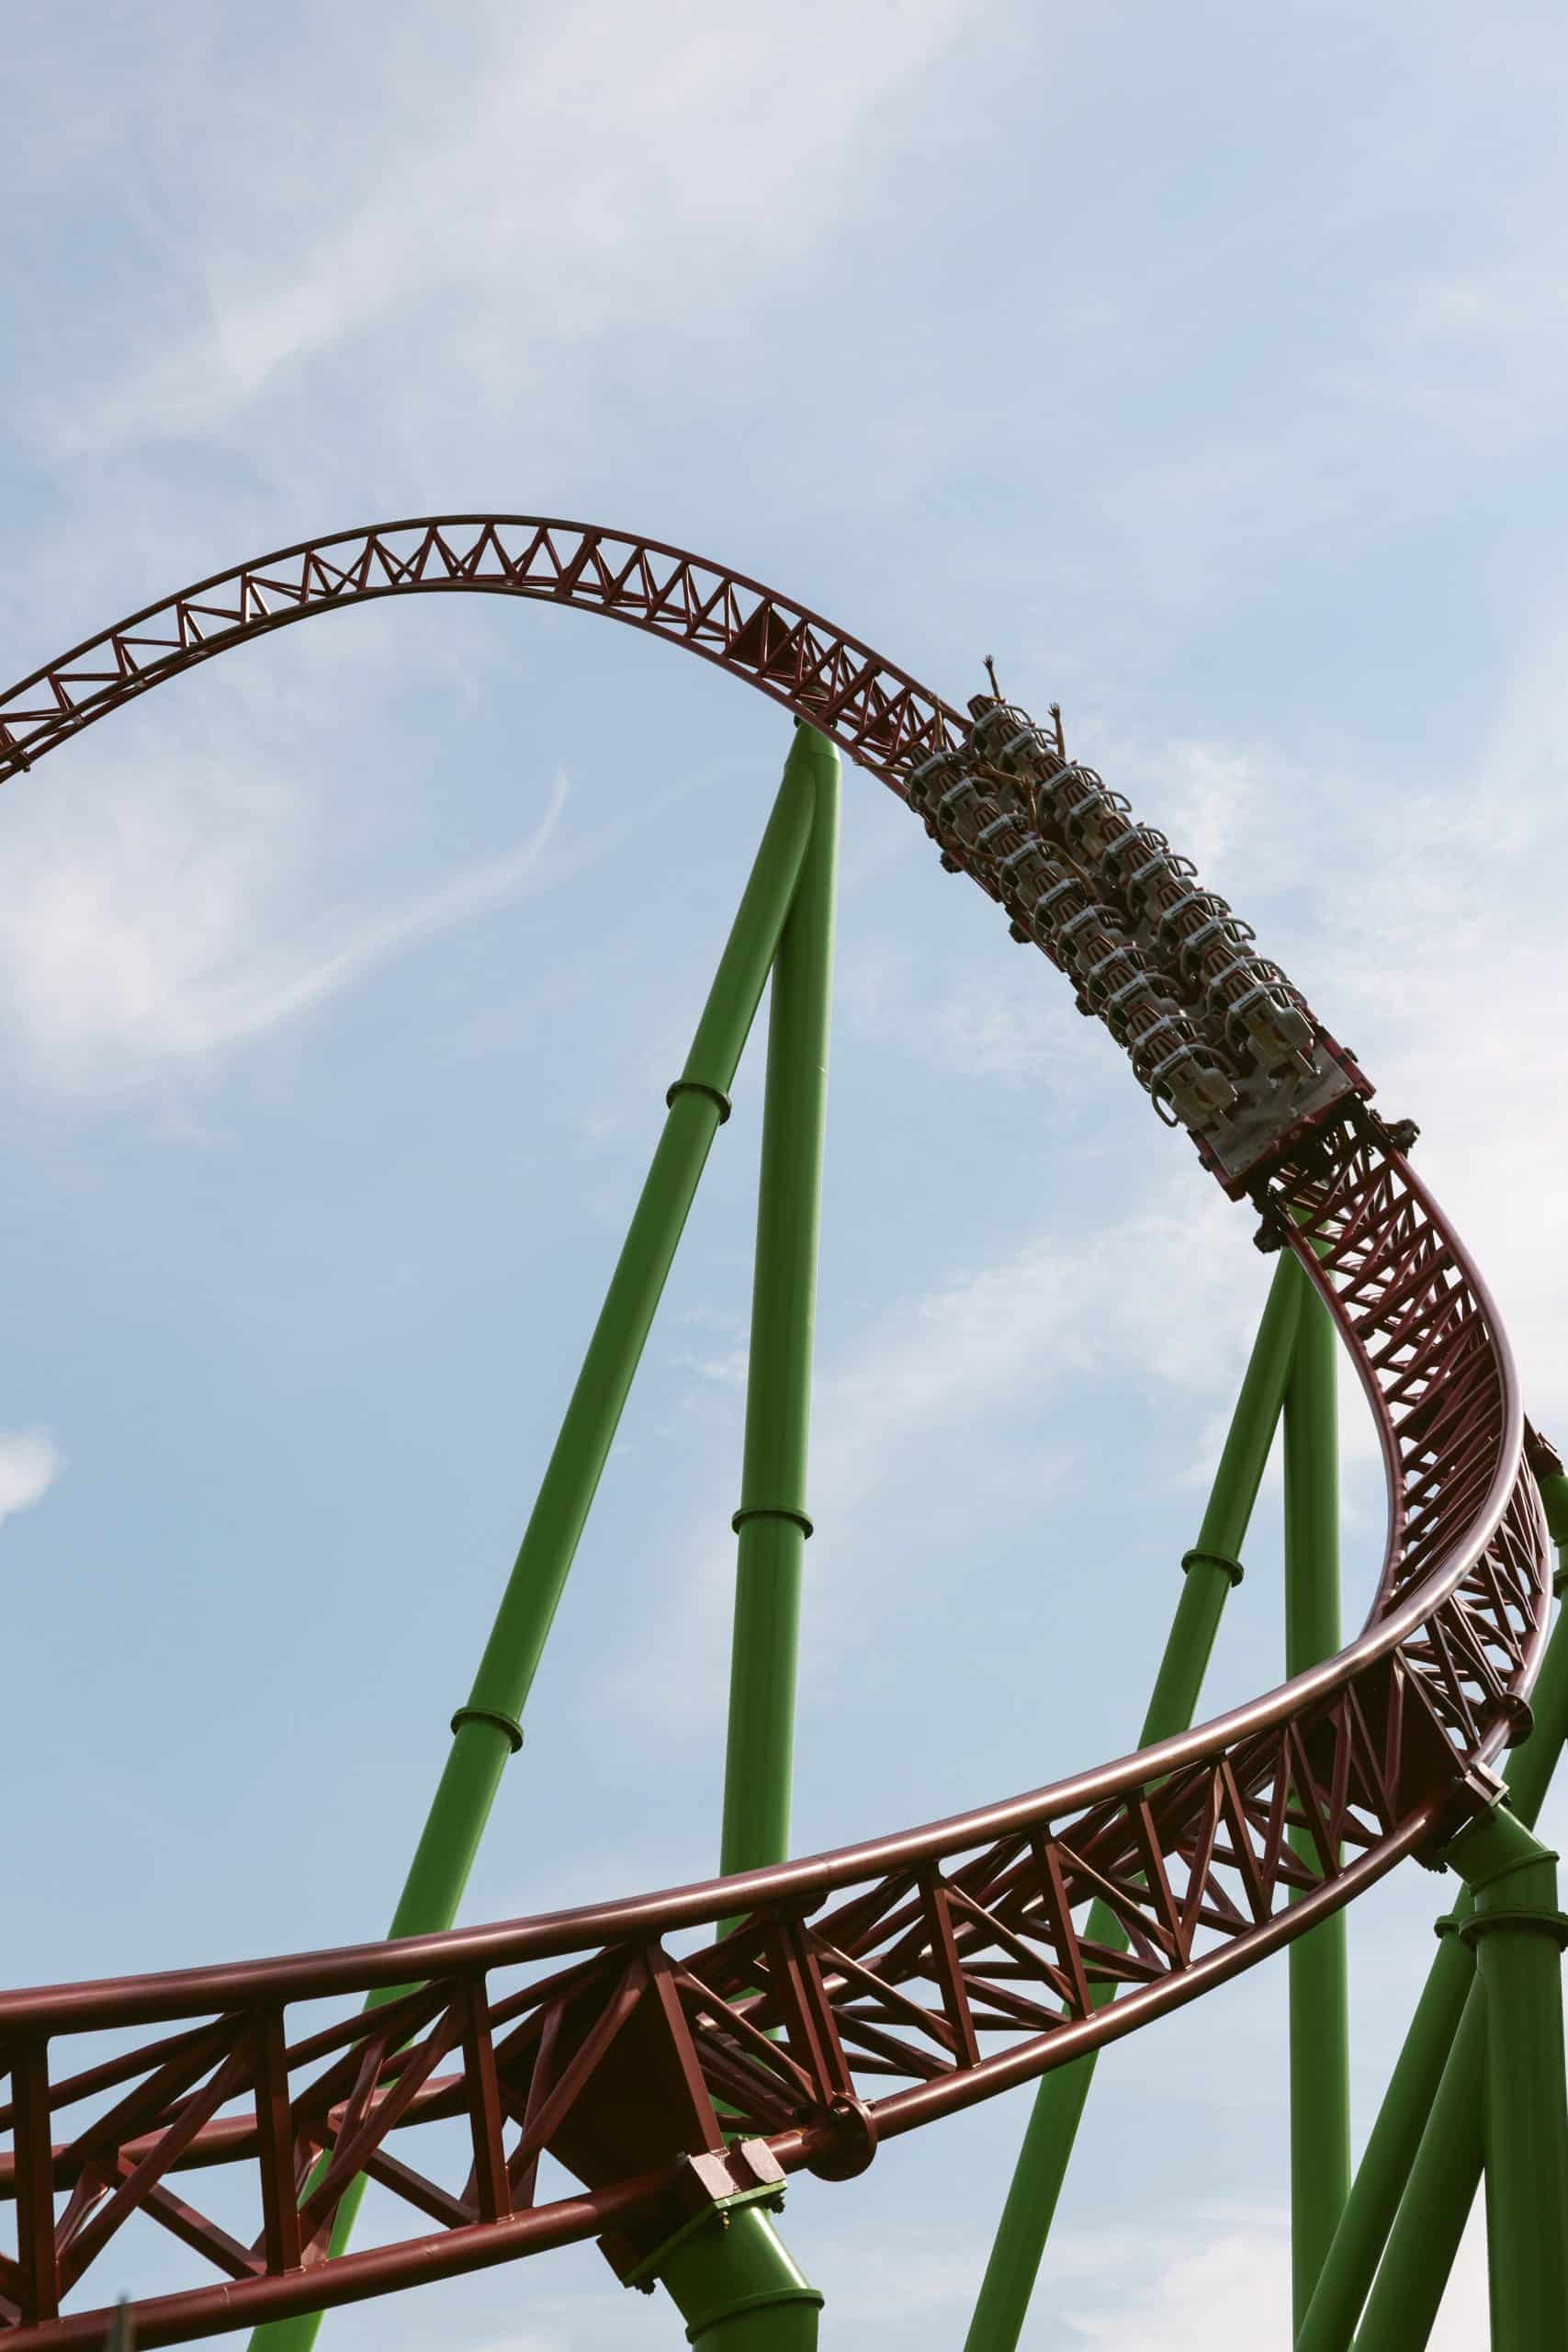 A roller coaster on green legs with a red track